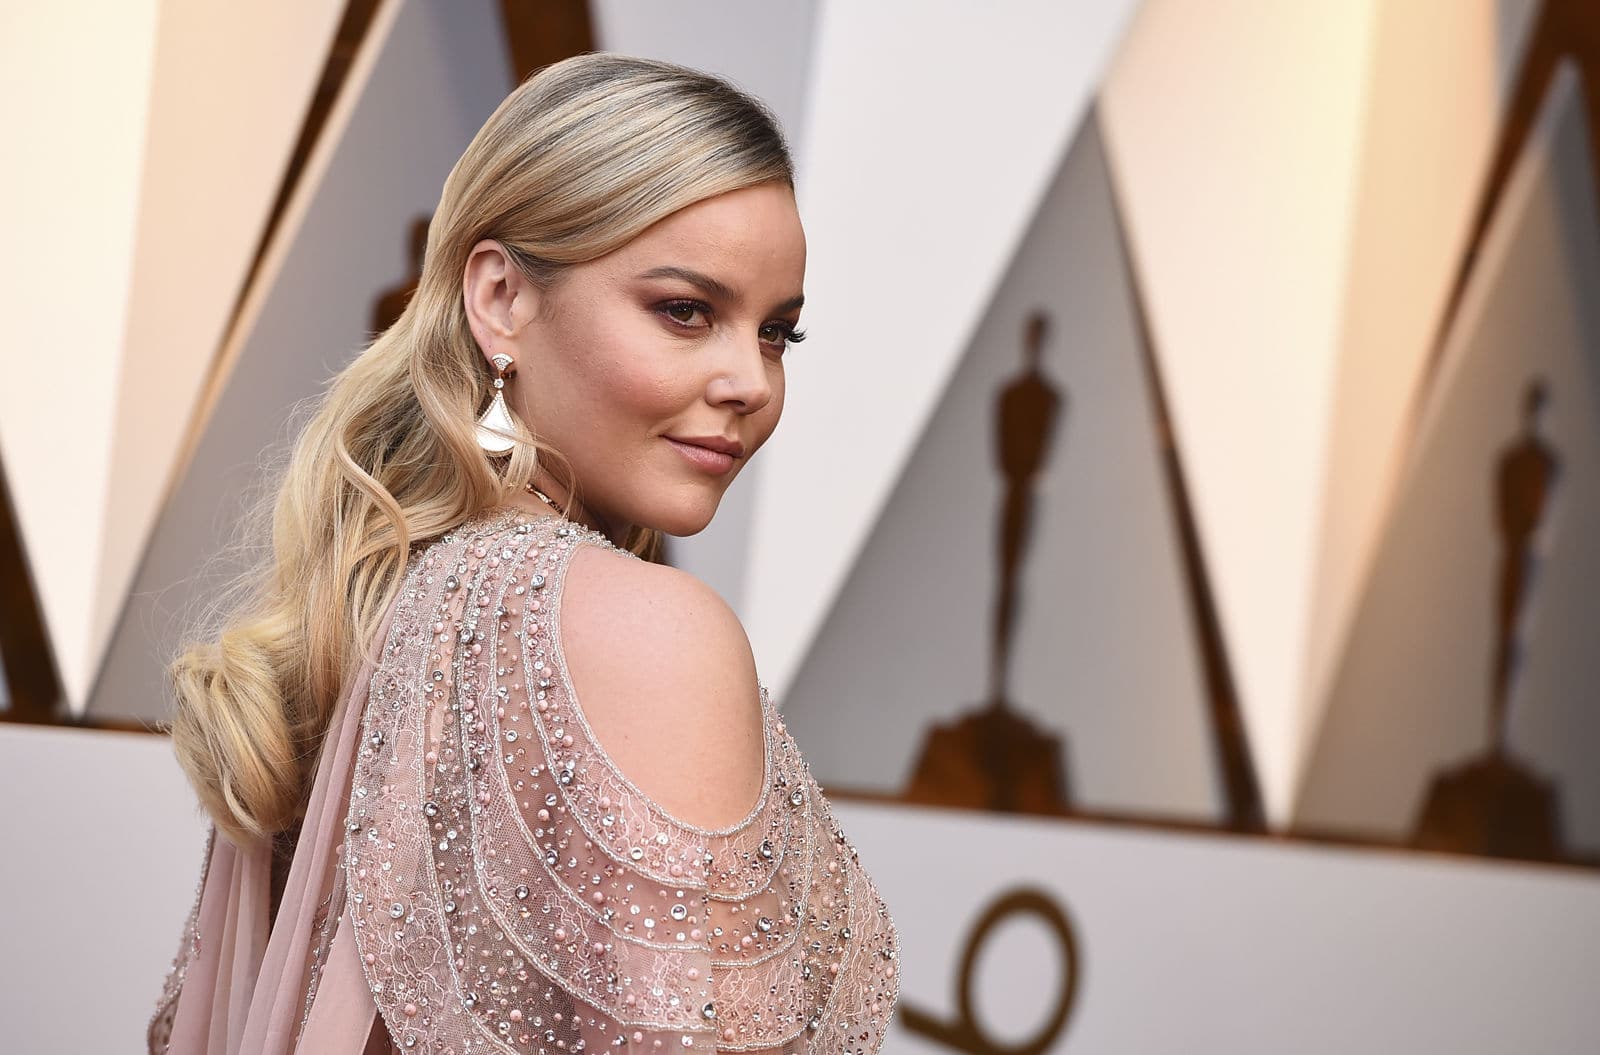 Abbie Cornish arrives at the Oscars on Sunday, March 4, 2018, at the Dolby Theatre in Los Angeles. (Photo by Jordan Strauss/Invision/AP)